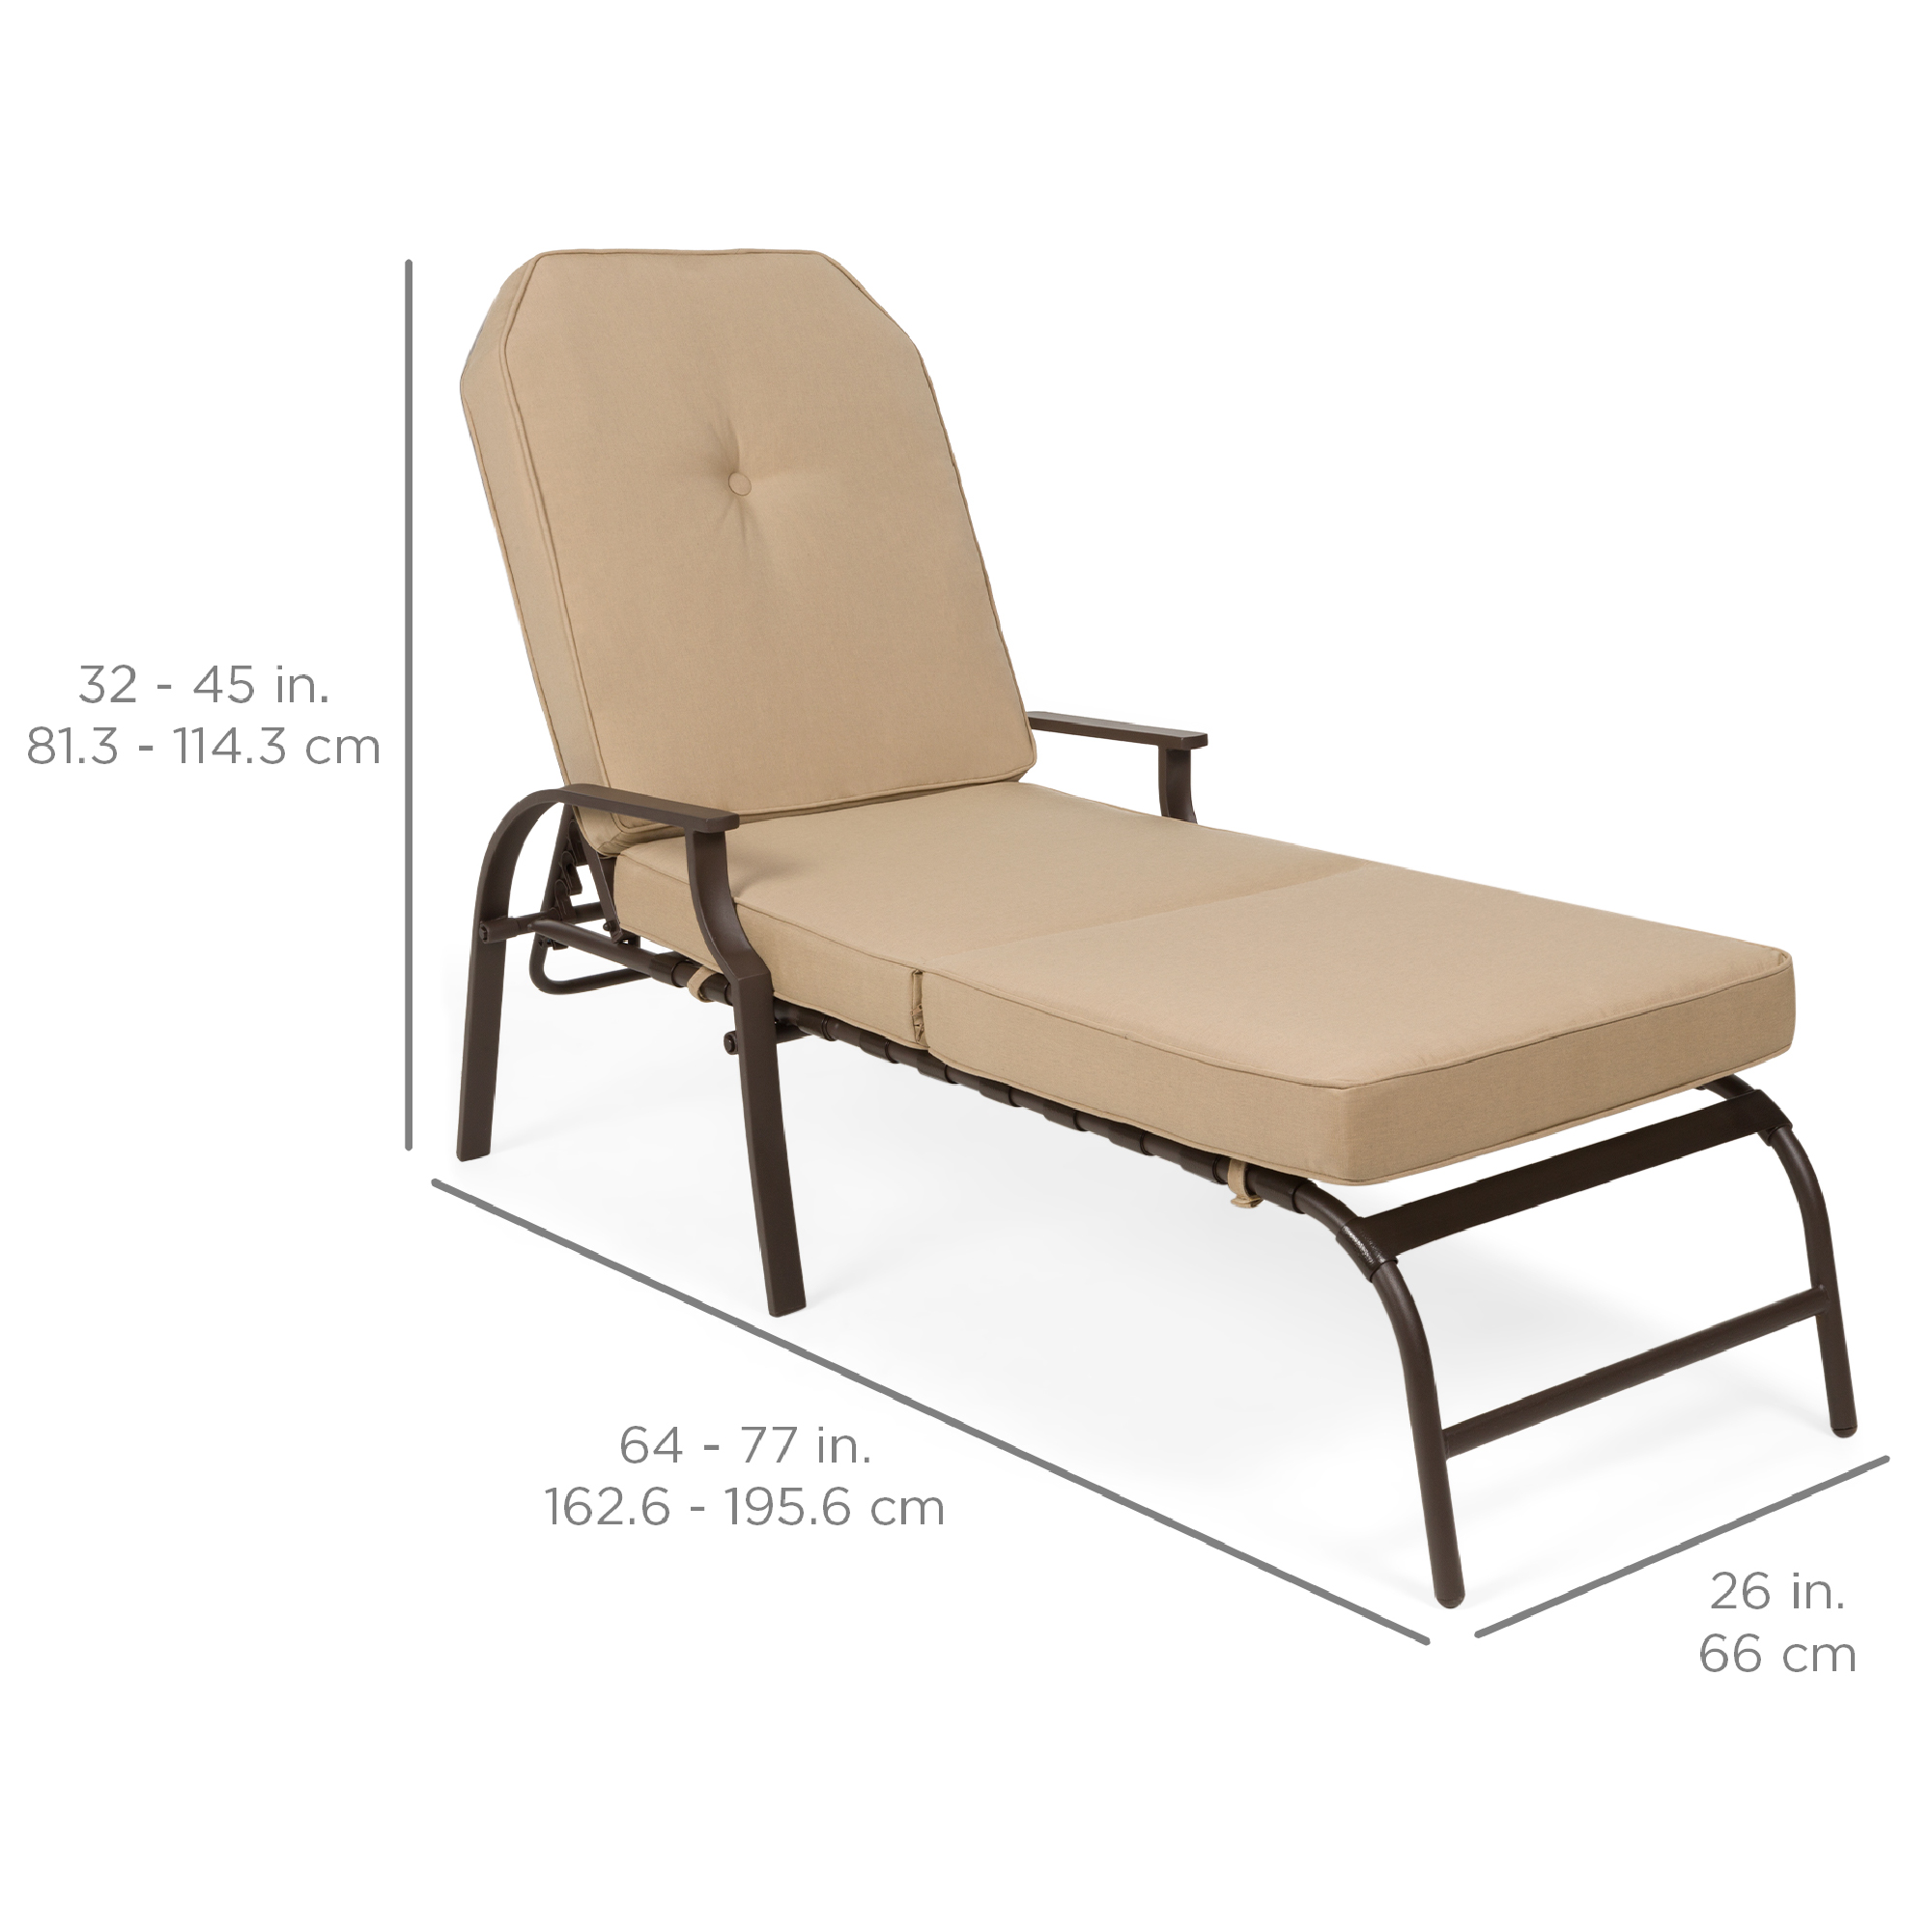 Best Choice Products Adjustable Outdoor Chaise Lounge Chair for Patio, Poolside w/ UV-Resistant Cushion - Brown/Beige - image 7 of 7